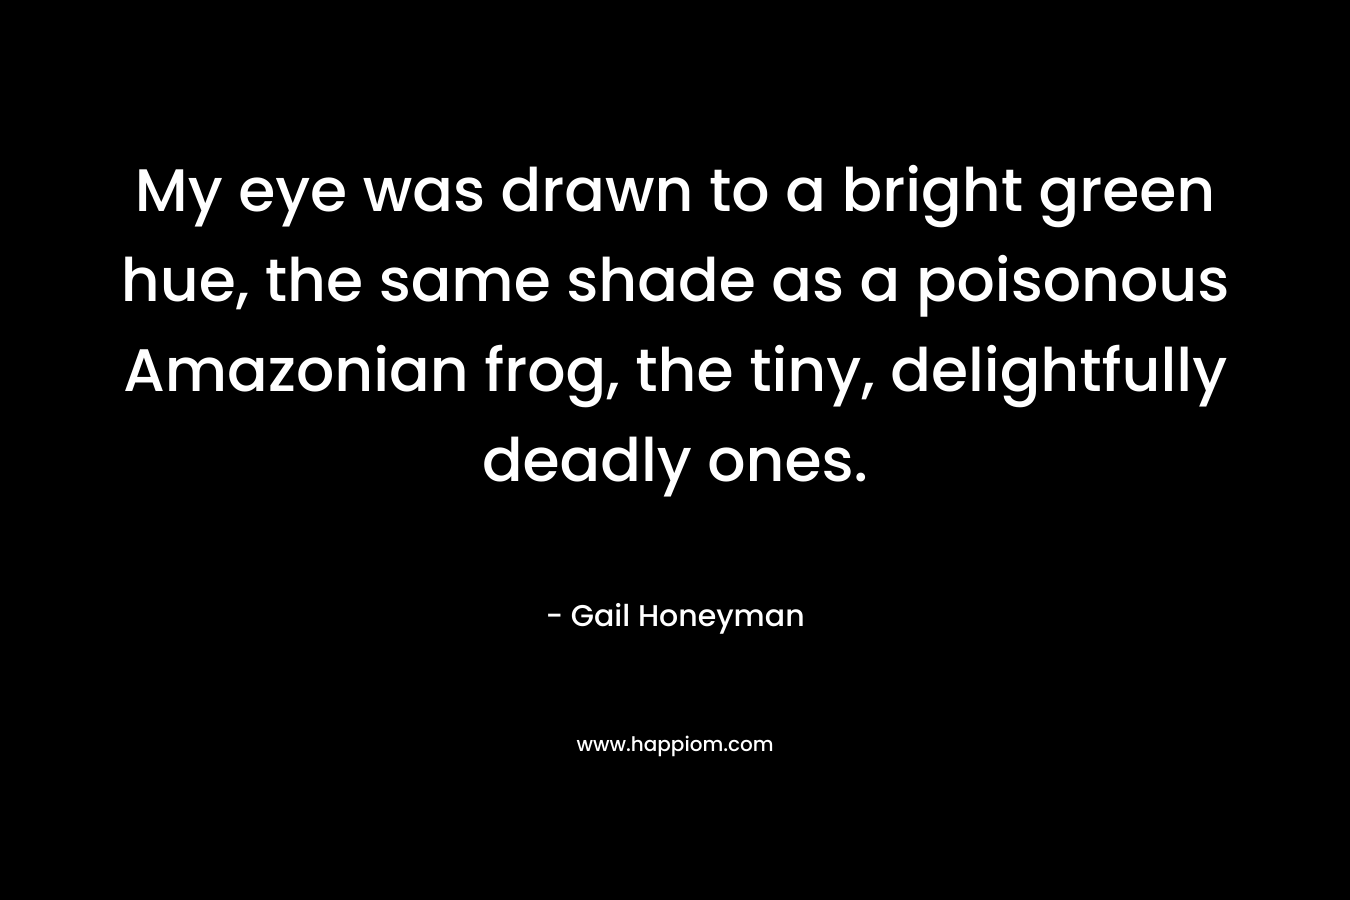 My eye was drawn to a bright green hue, the same shade as a poisonous Amazonian frog, the tiny, delightfully deadly ones. – Gail Honeyman